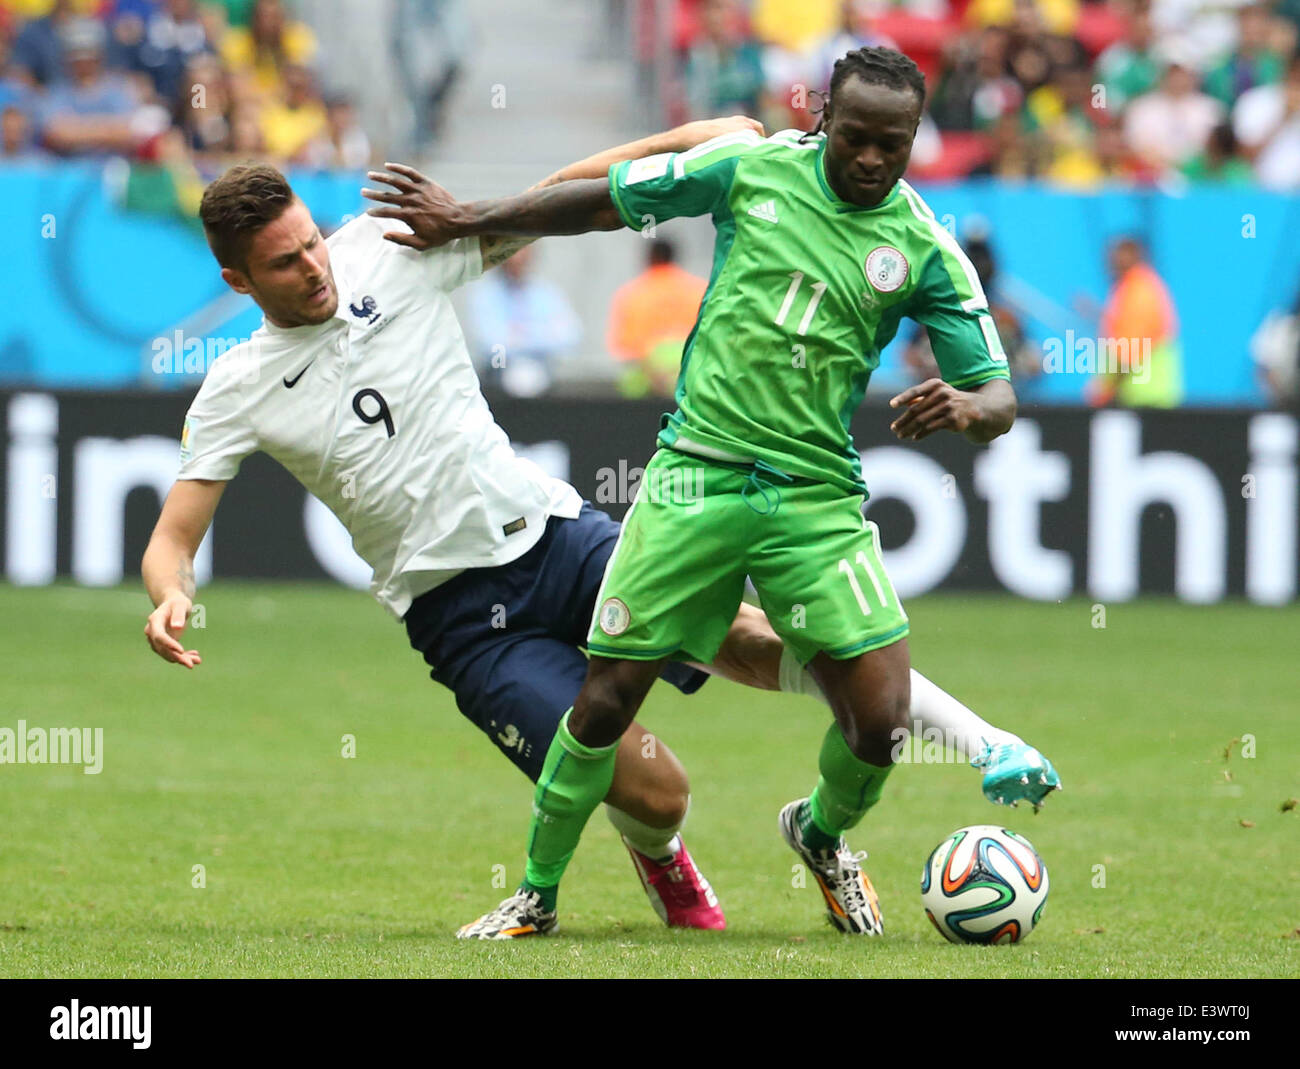 Brasilia, Brazil. 30th June, 2014. France's Olivier Giroud (L) vies with Nigeria's Victor Moses during a Round of 16 match between France and Nigeria of 2014 FIFA World Cup at the Estadio Nacional Stadium in Brasilia, Brazil, on June 30, 2014. Credit:  Xinhua/Alamy Live News Stock Photo